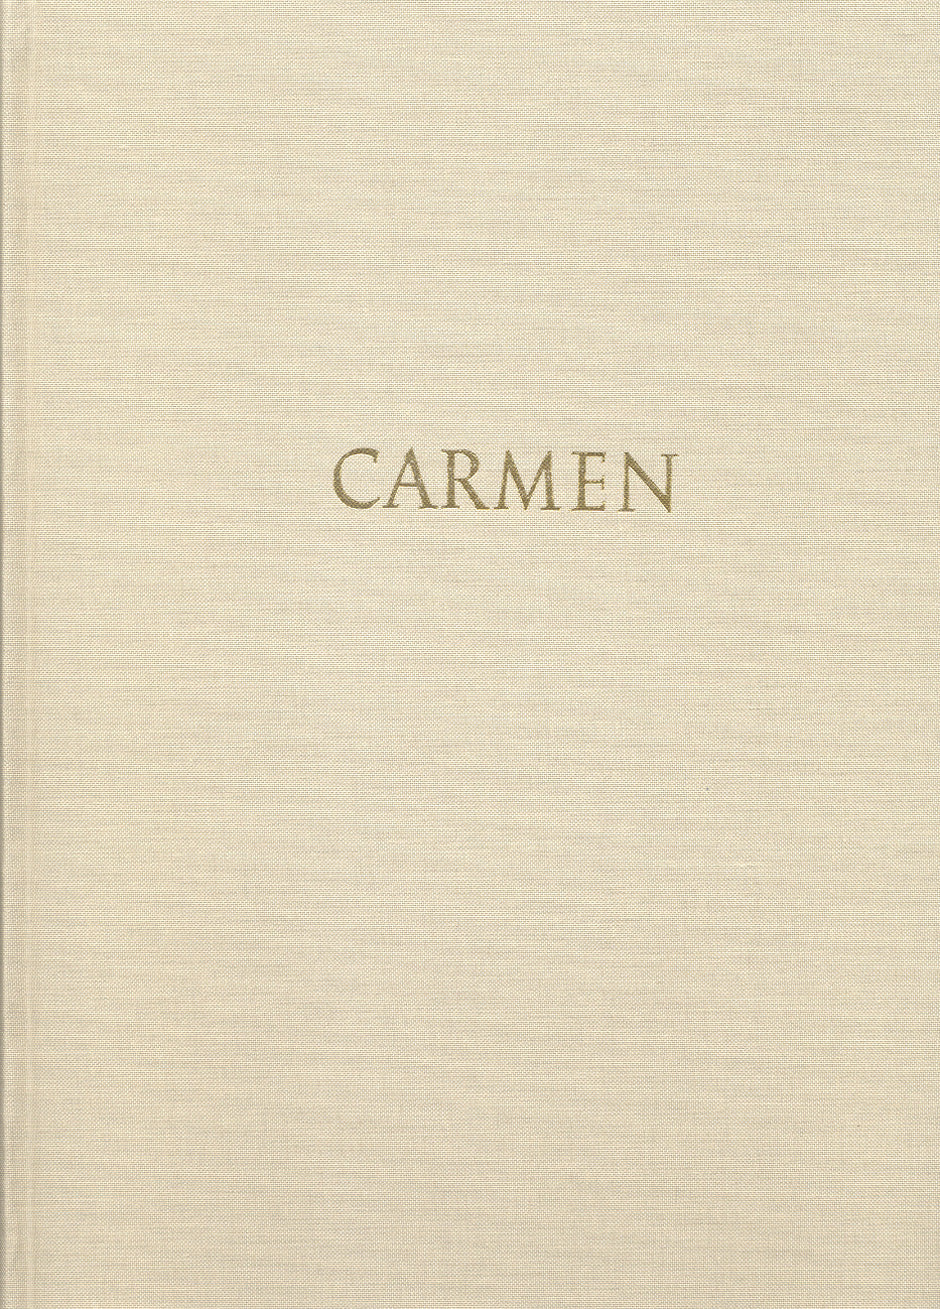 Bizet Carmen -Opera in three acts- (Critical new edition with the recitatives later composed by Ernest Guiraud)